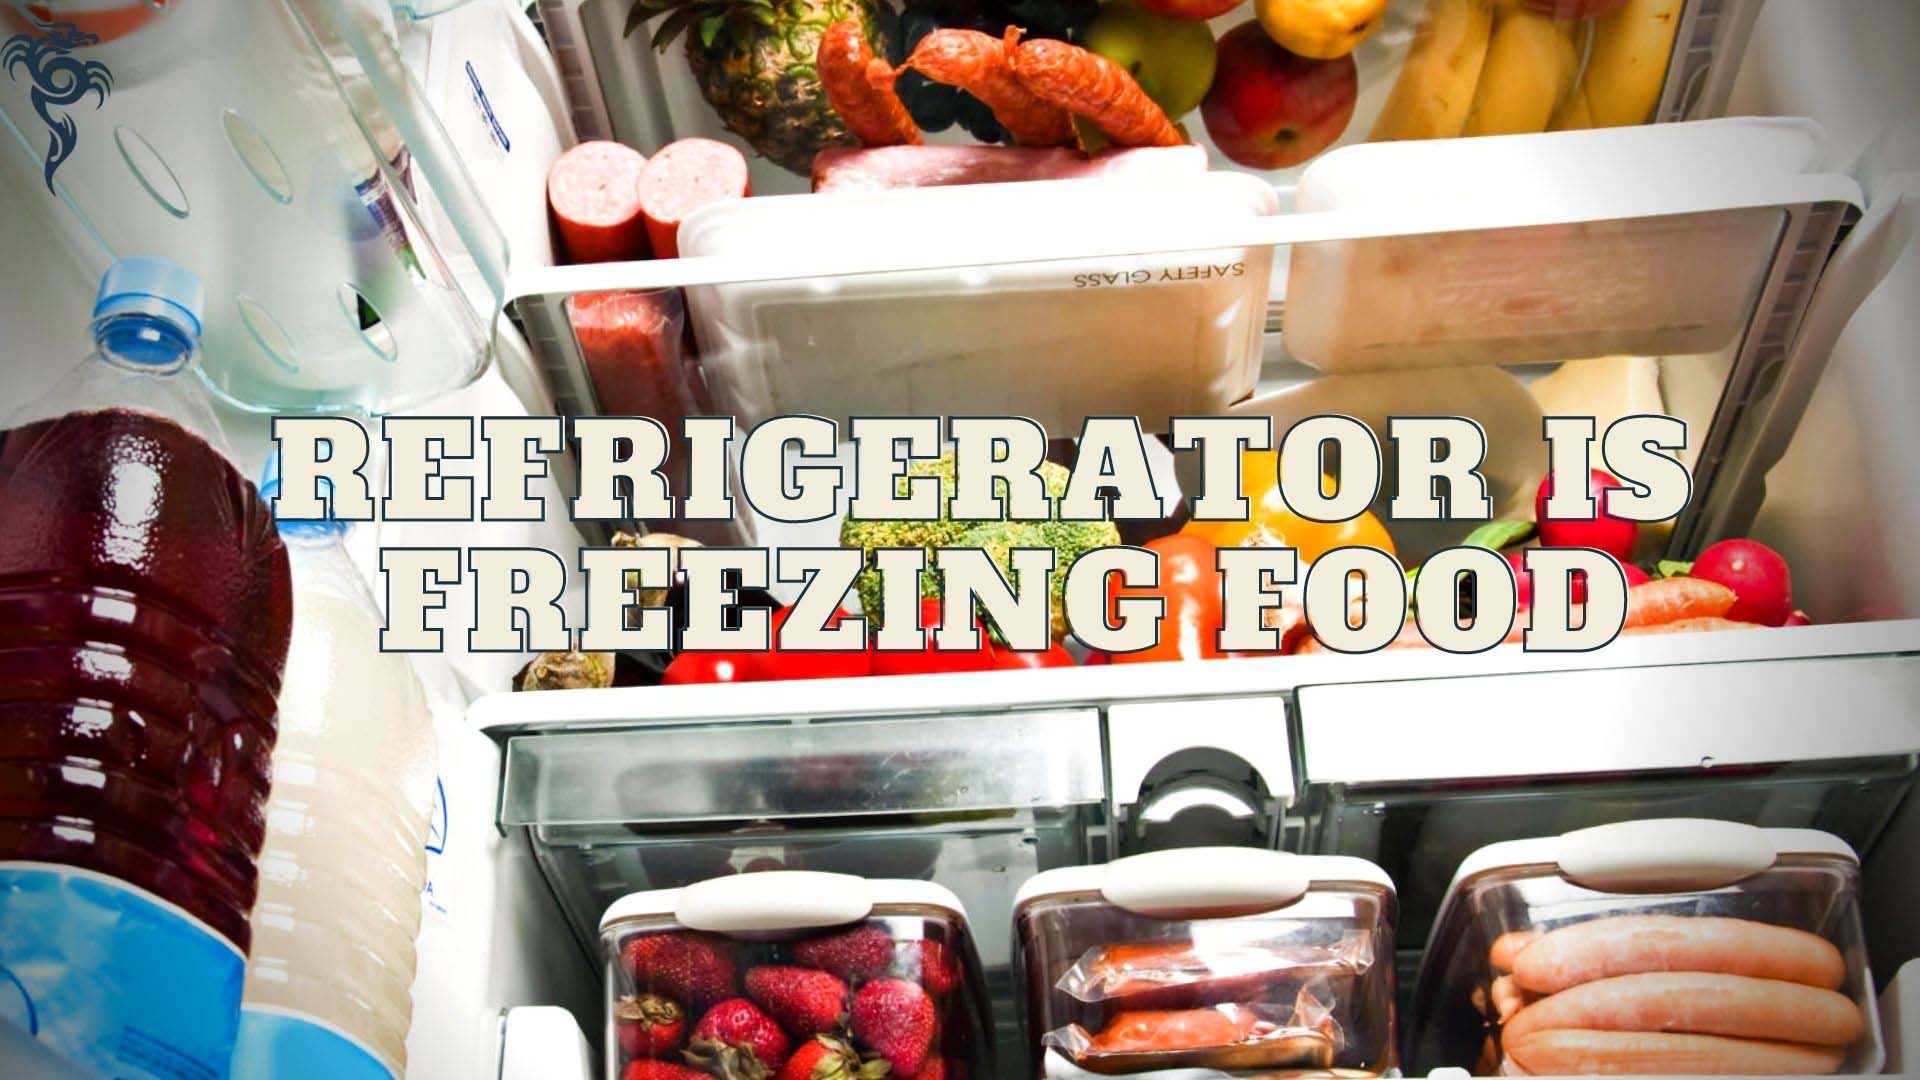 Why Your Refrigerator Is Freezing Food The 7 Main Cause And How To Fix